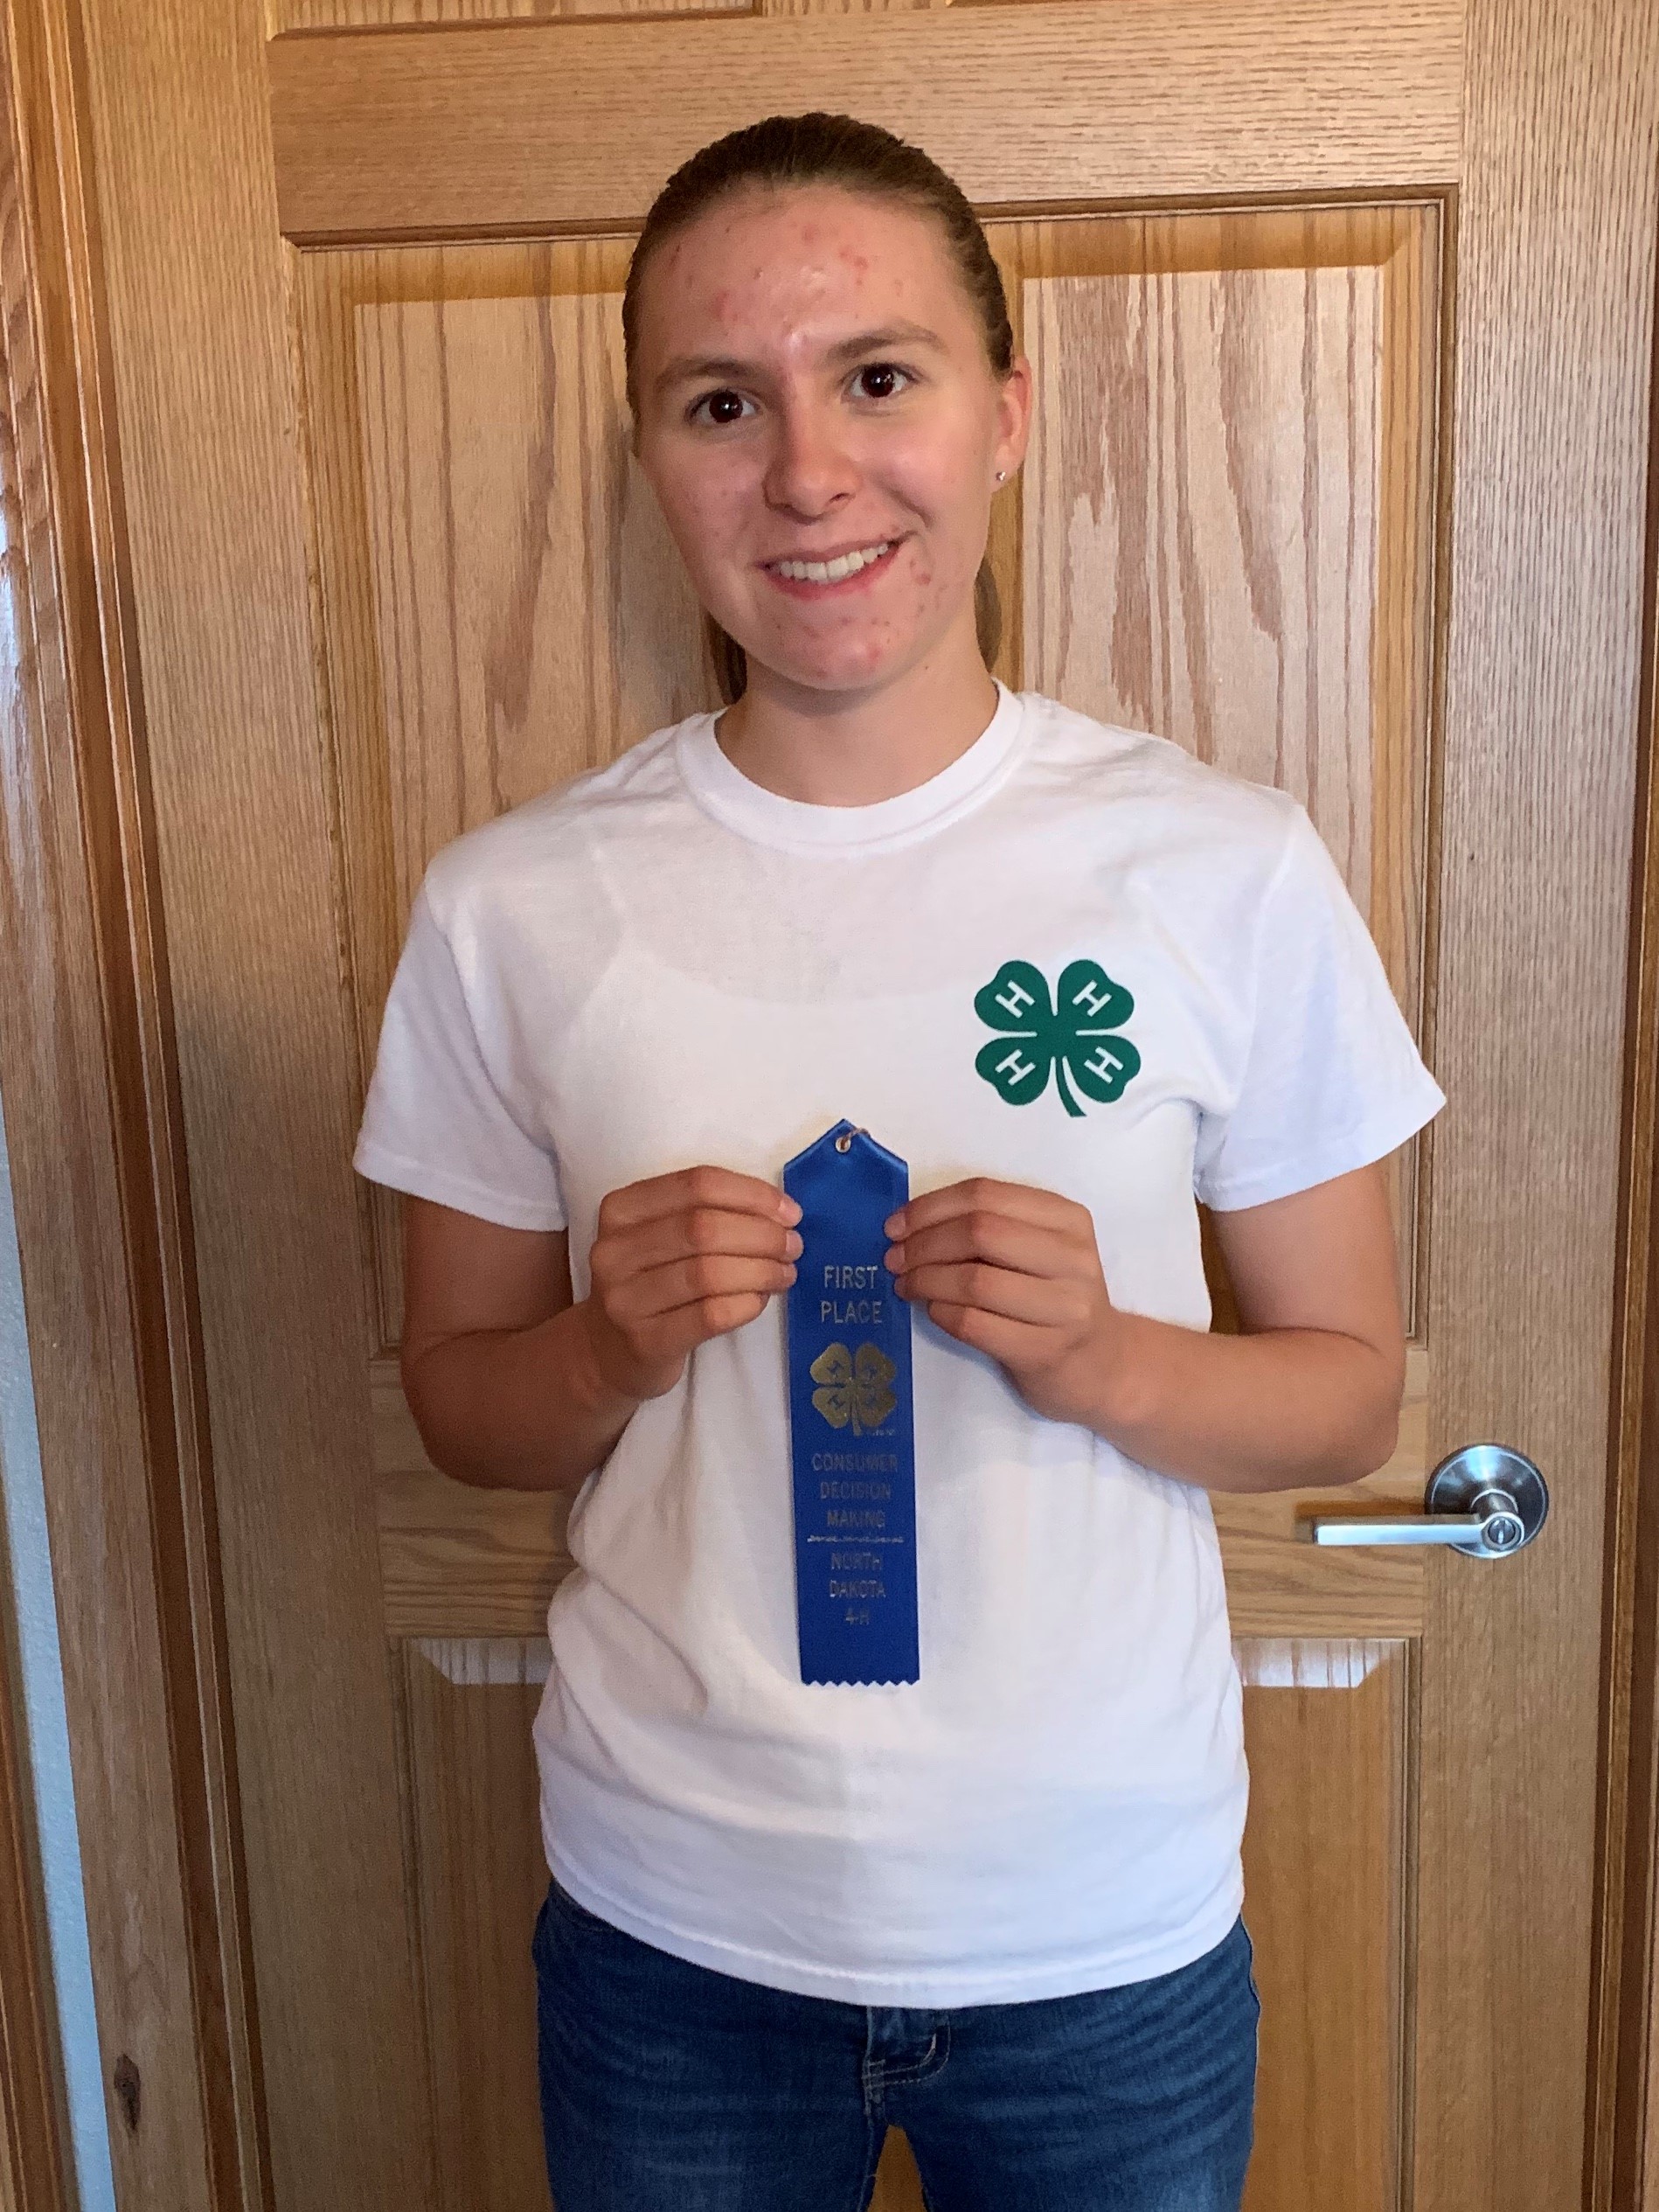 Faith Norby shows off her award from the 2020 North Dakota 4-H consumer decision making contest. She is a member of the Stark-Billings County team who took first place in the senior division. (NDSU photo)